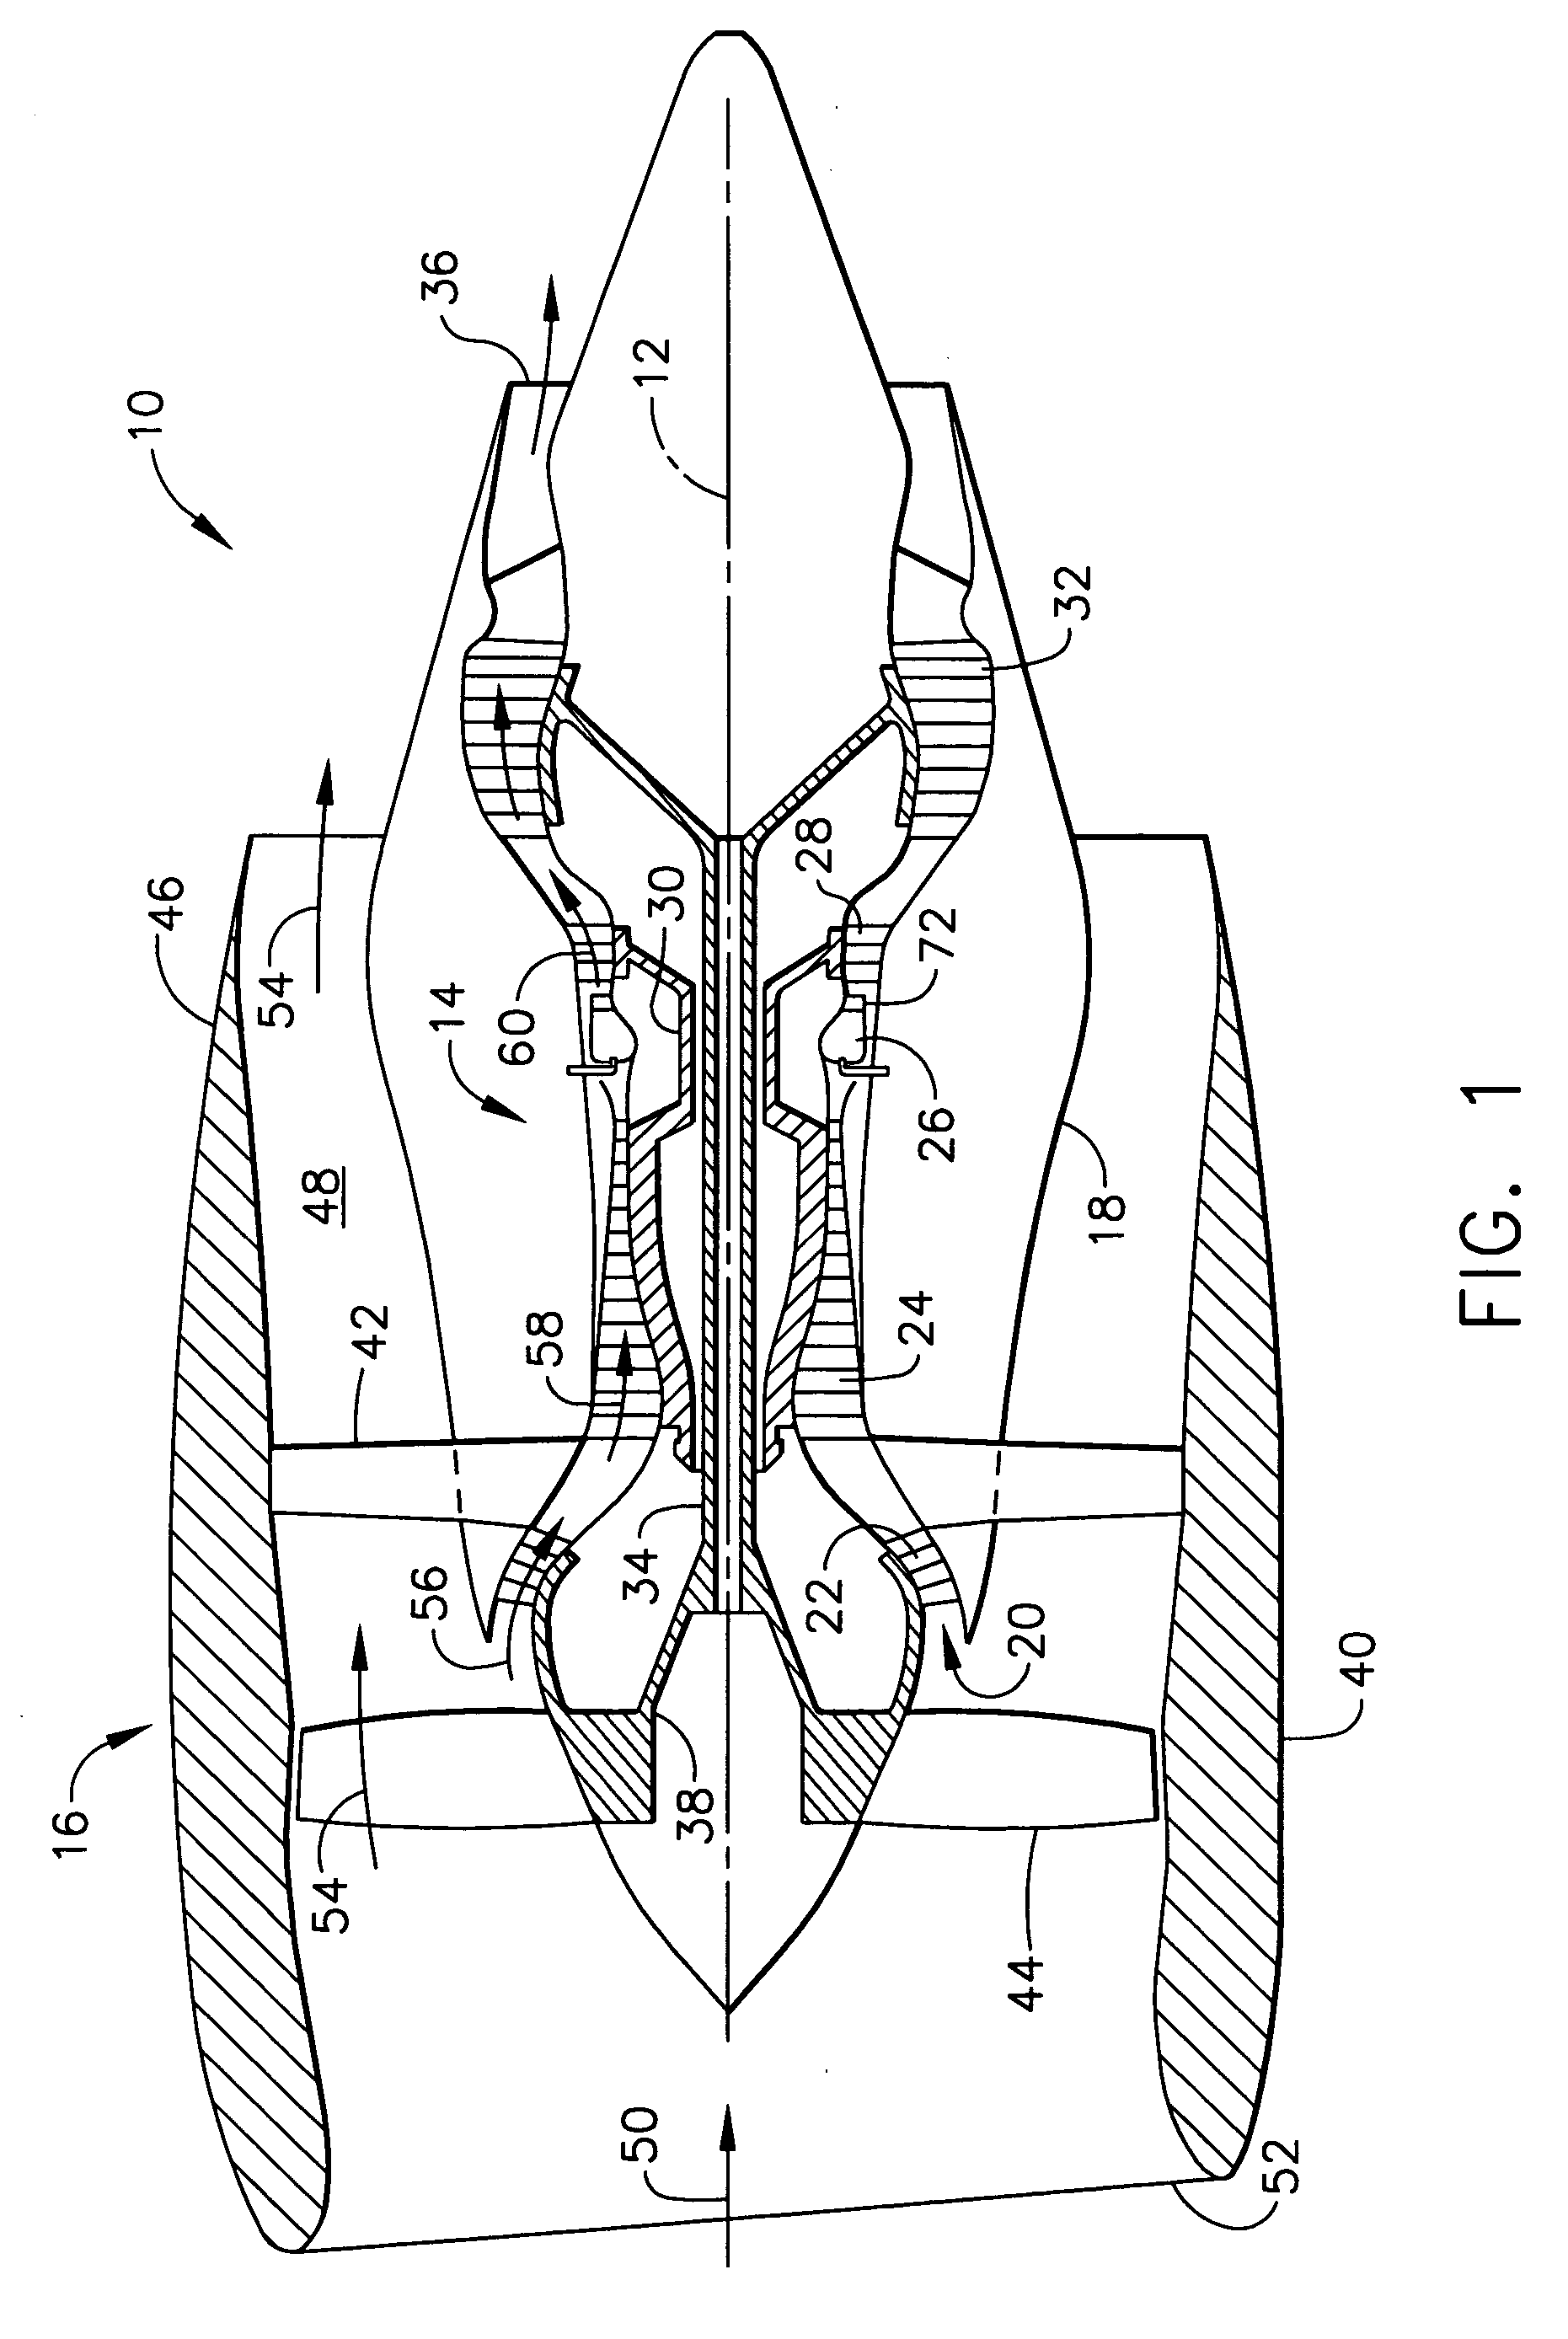 Mixer assembly for combustor of a gas turbine engine having a main mixer with improved fuel penetration